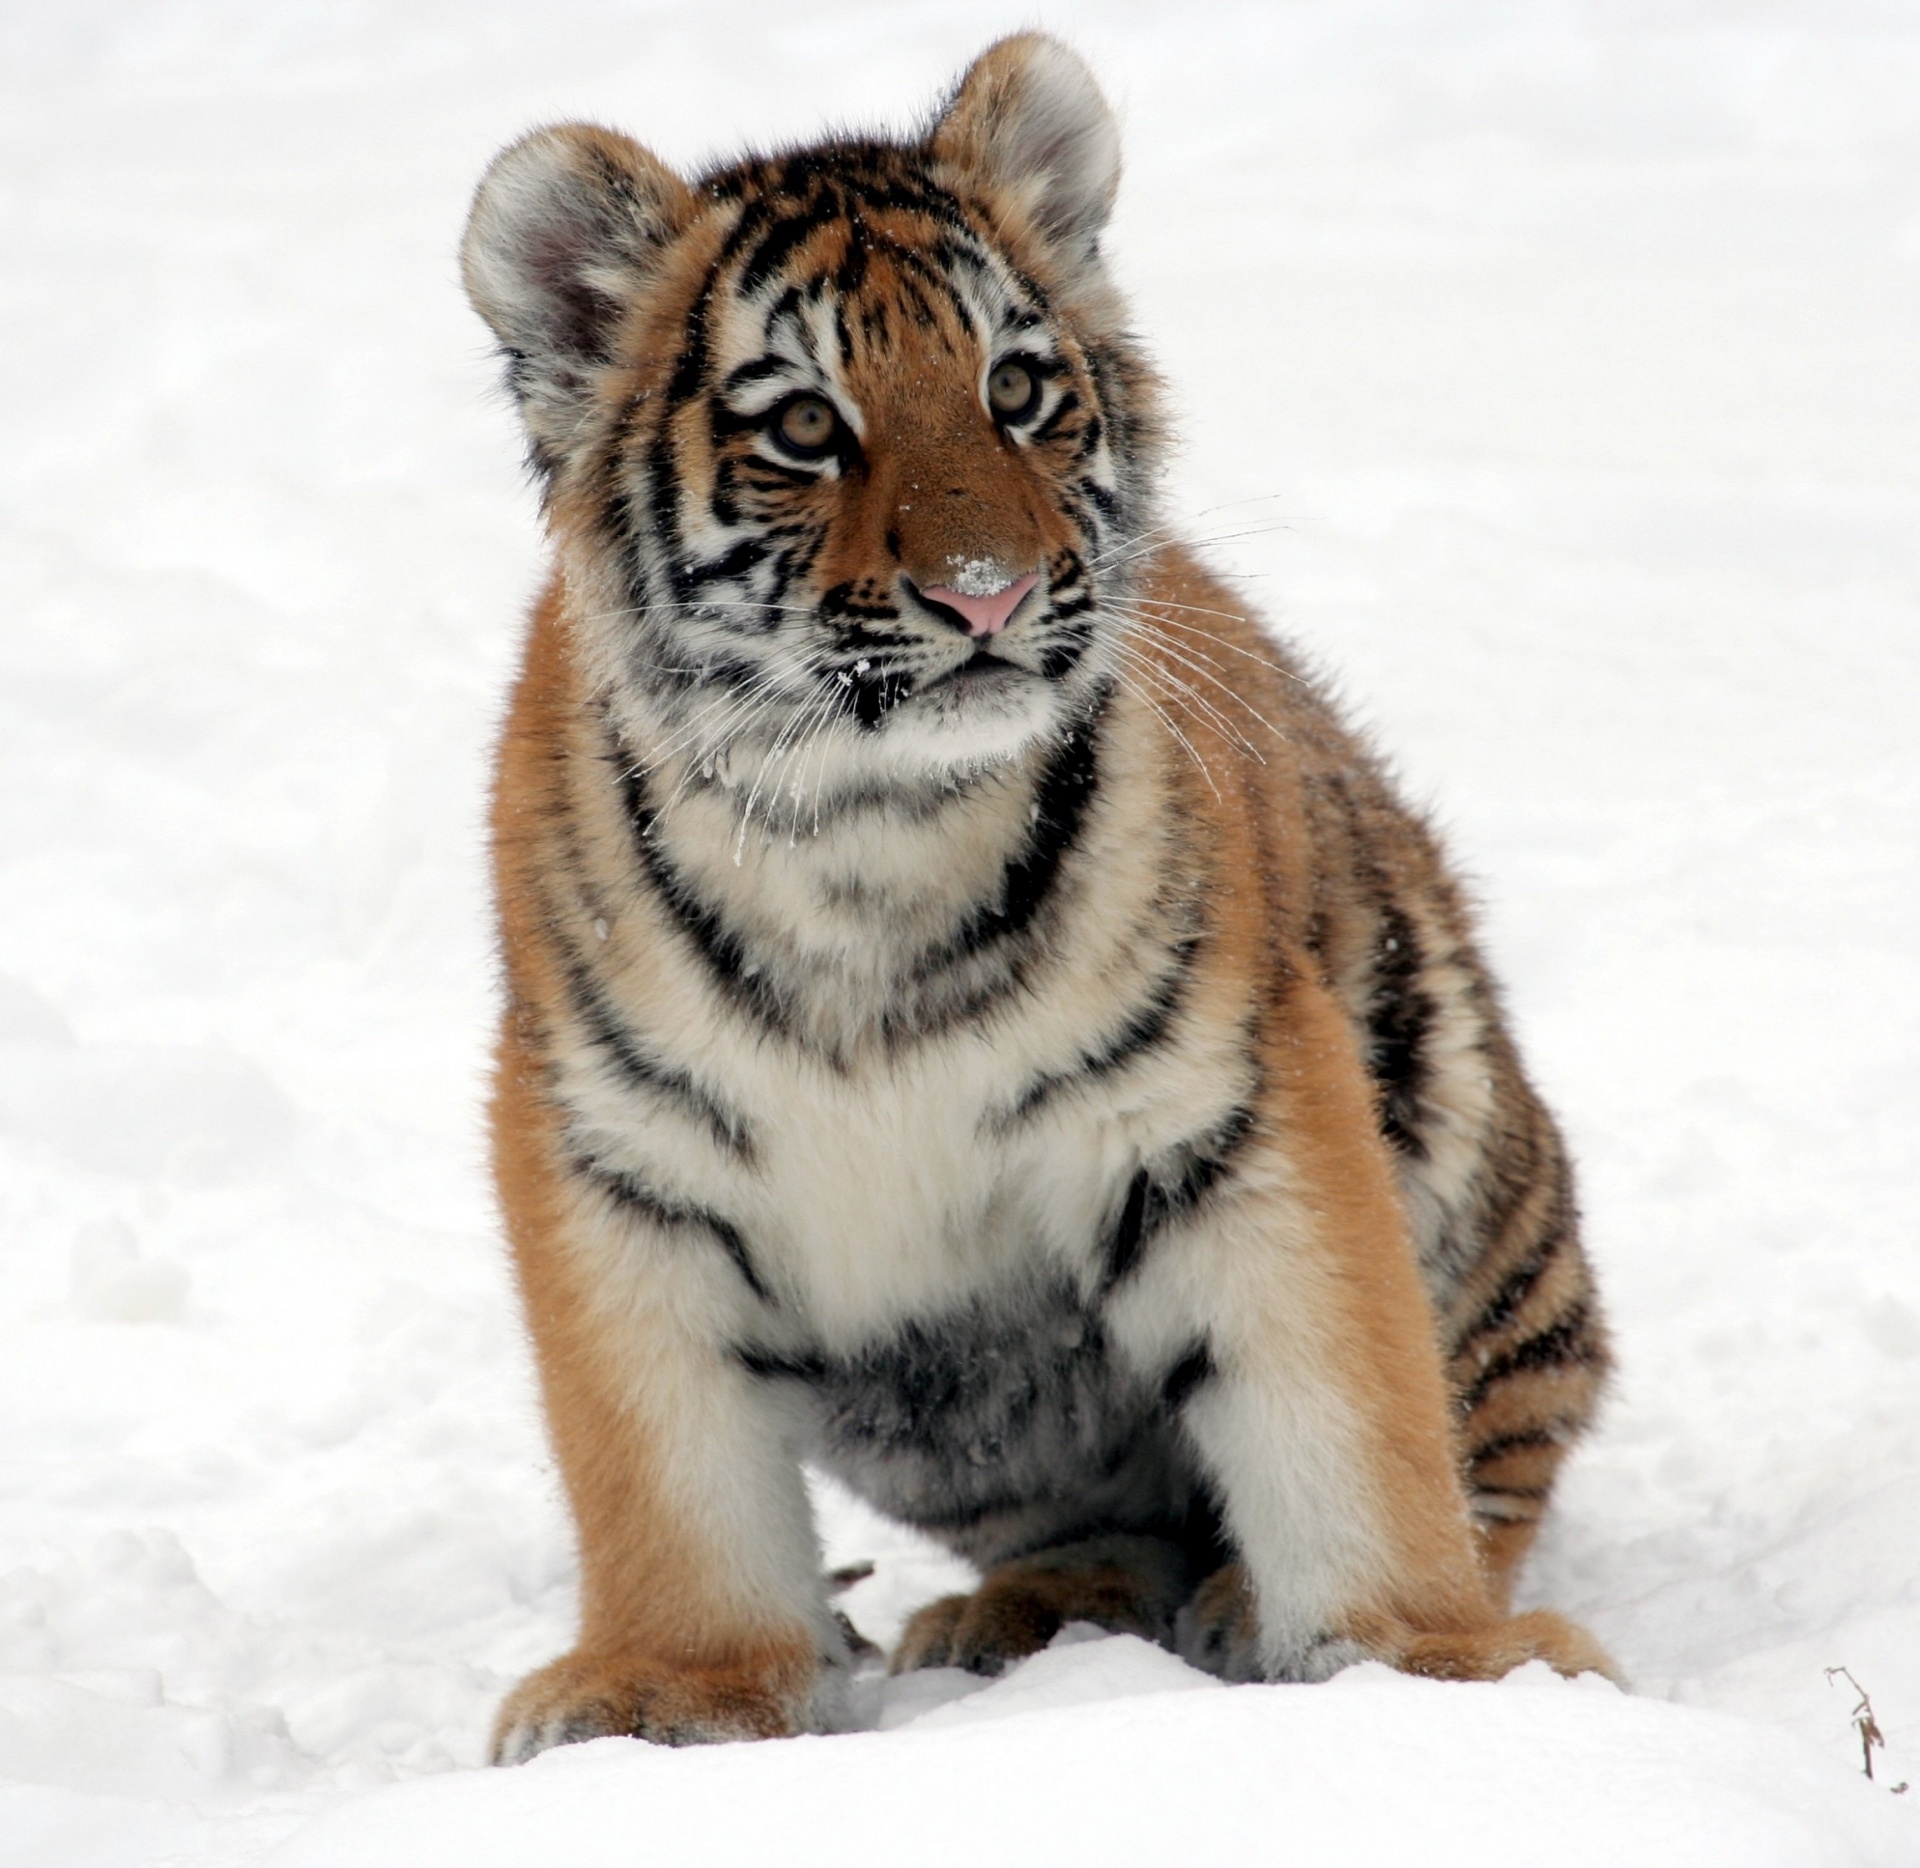 Baby Tiger in the Snow